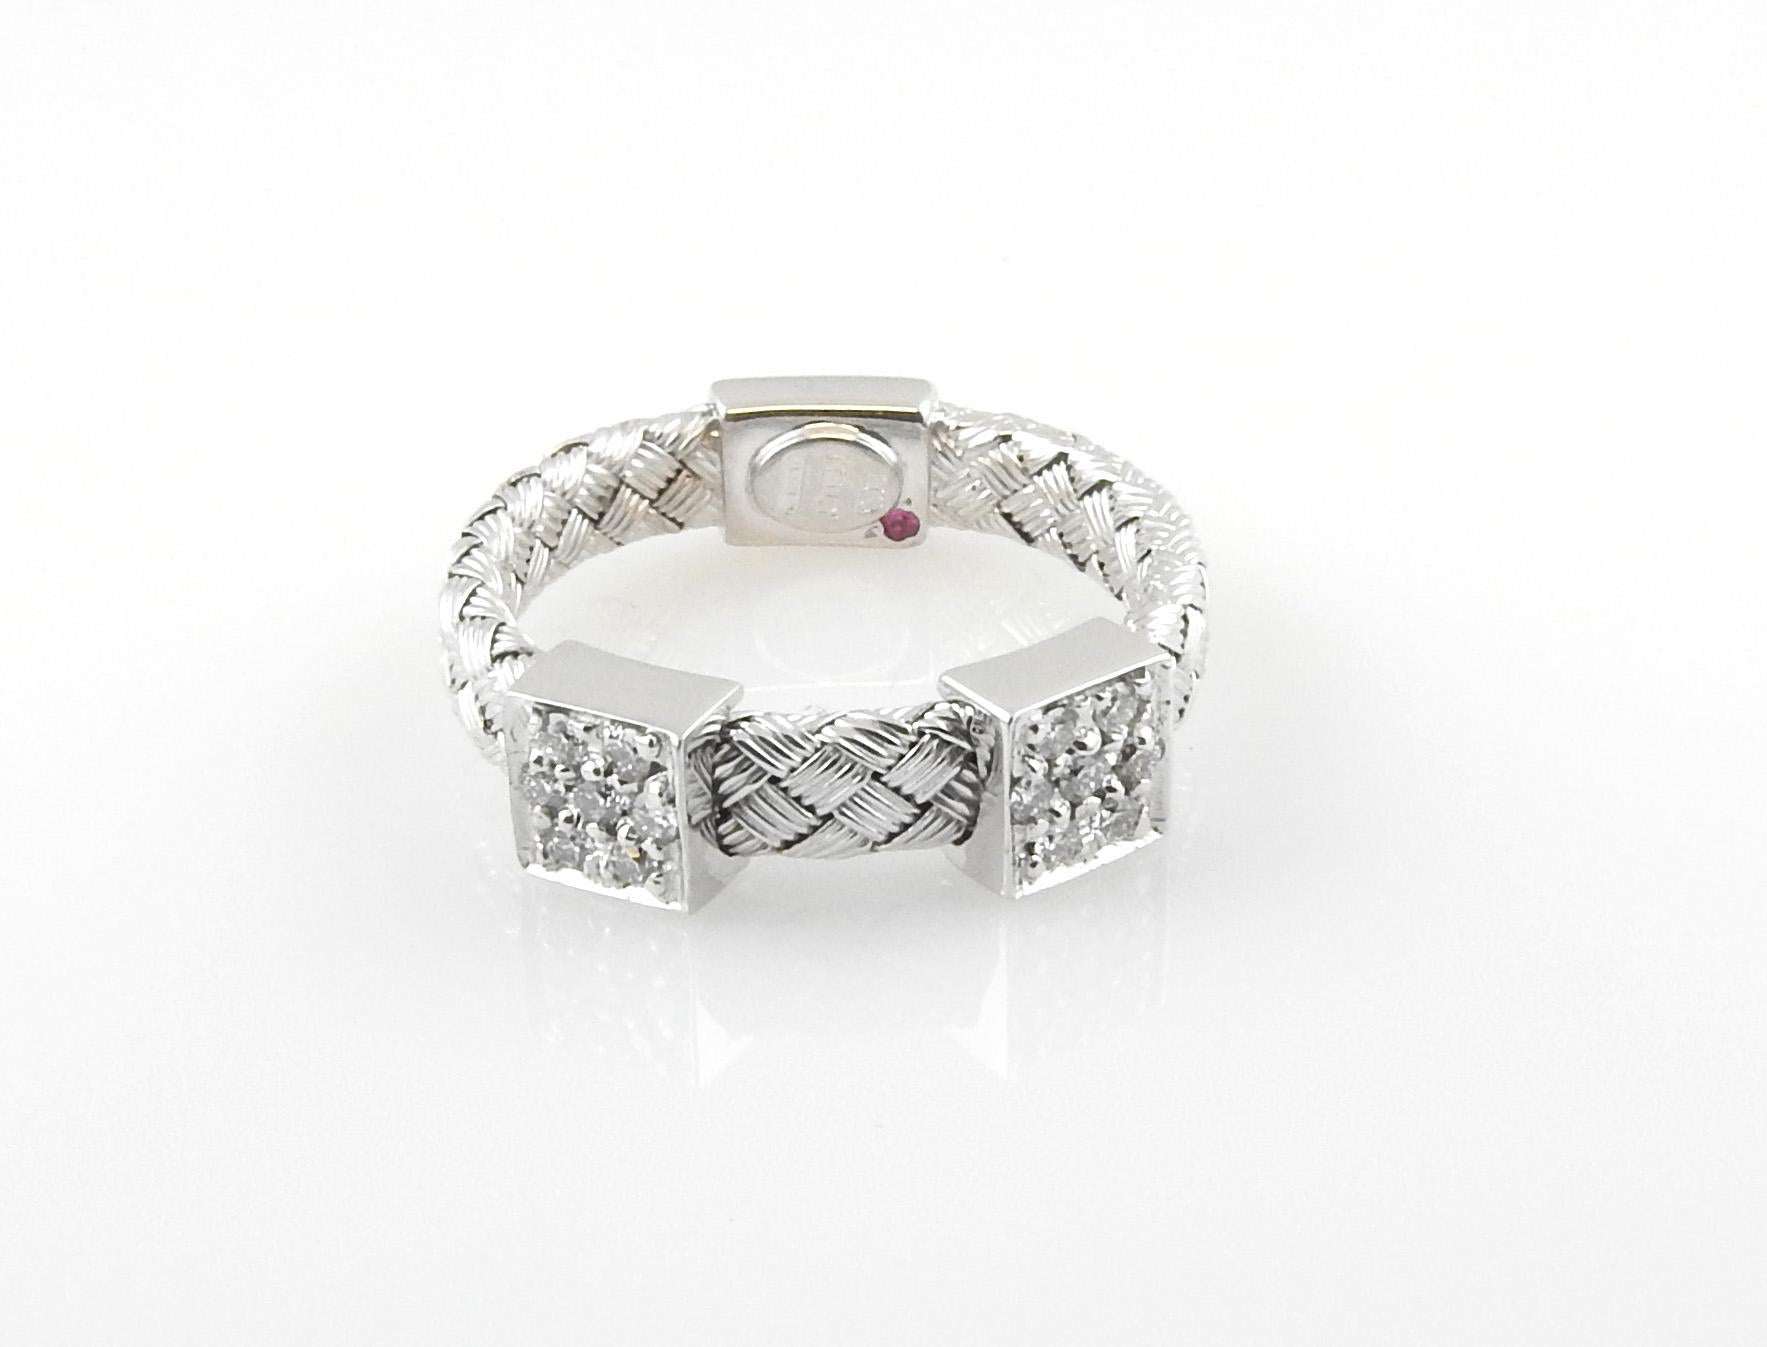 Roberto Coin 18K White Gold Primavera Diamond Basket Weave Band Size 6.5

This beautiful cable band is set in white gold and has two square diamond stations. 

Each diamond station is set with 7 round brilliant diamonds of VS clarity and G